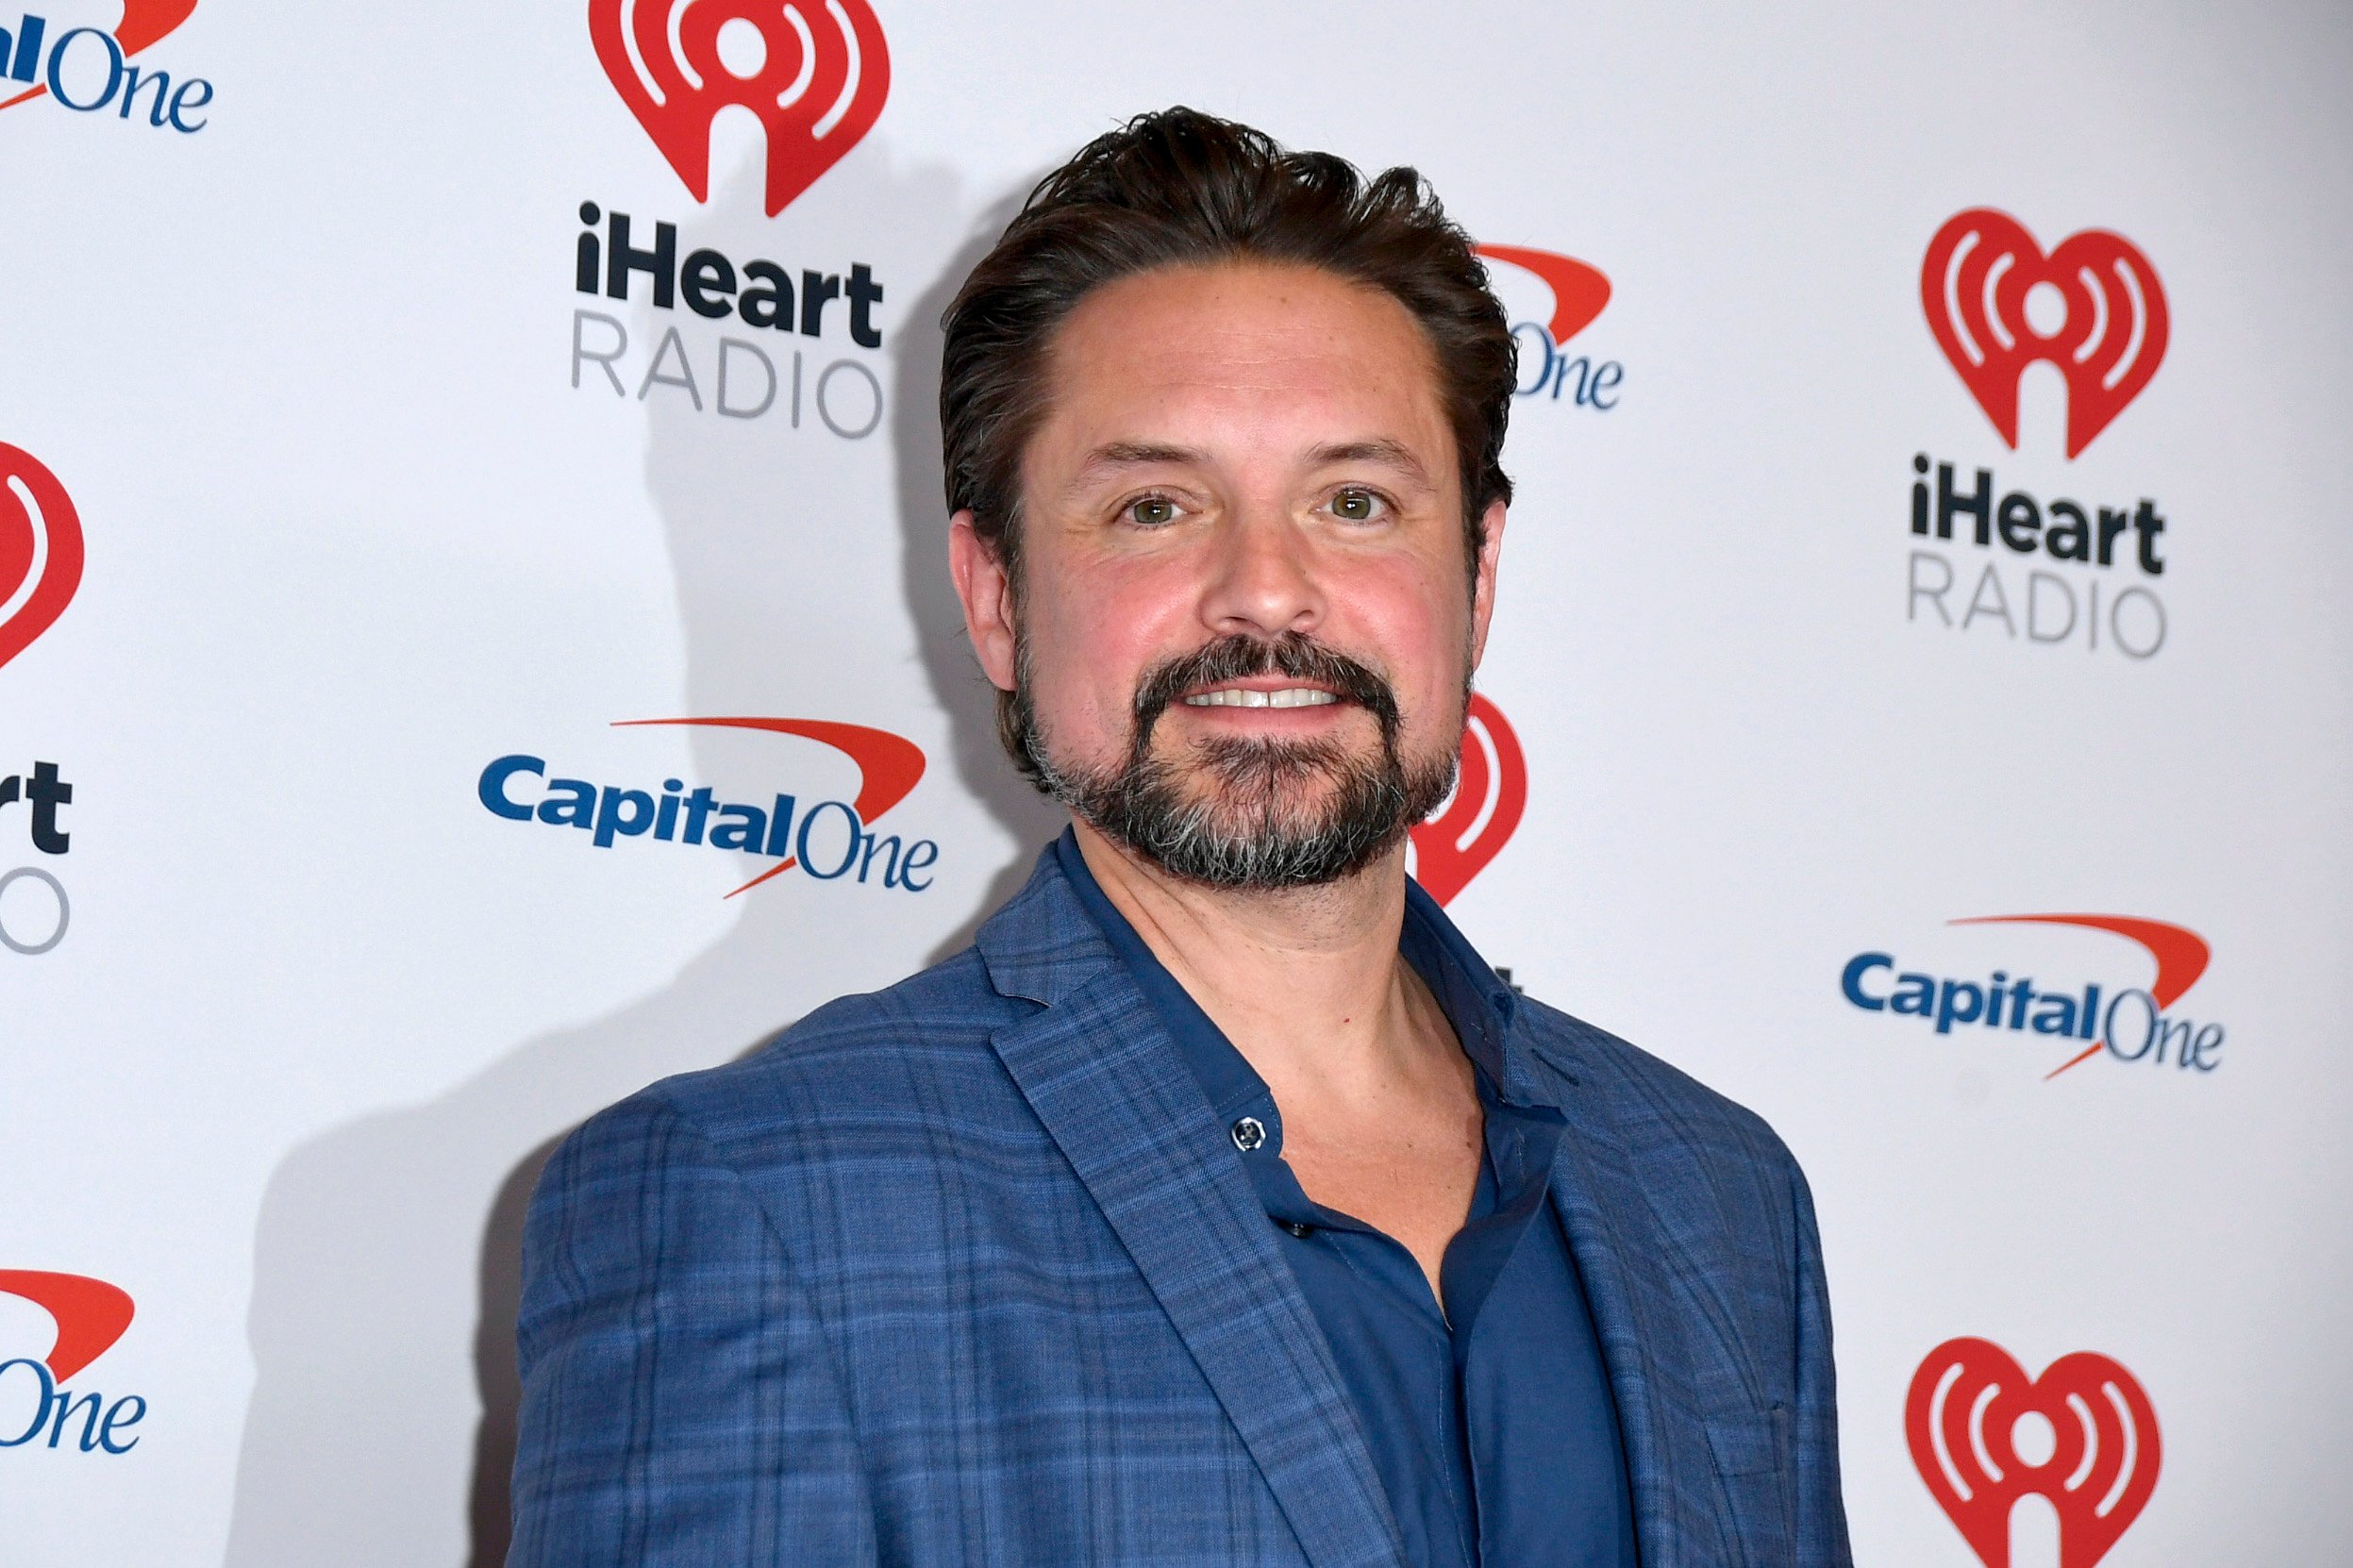 ‘Boy Meets World’ Star Will Friedle Is Ready for More on-Camera Work in Movies and TV Shows